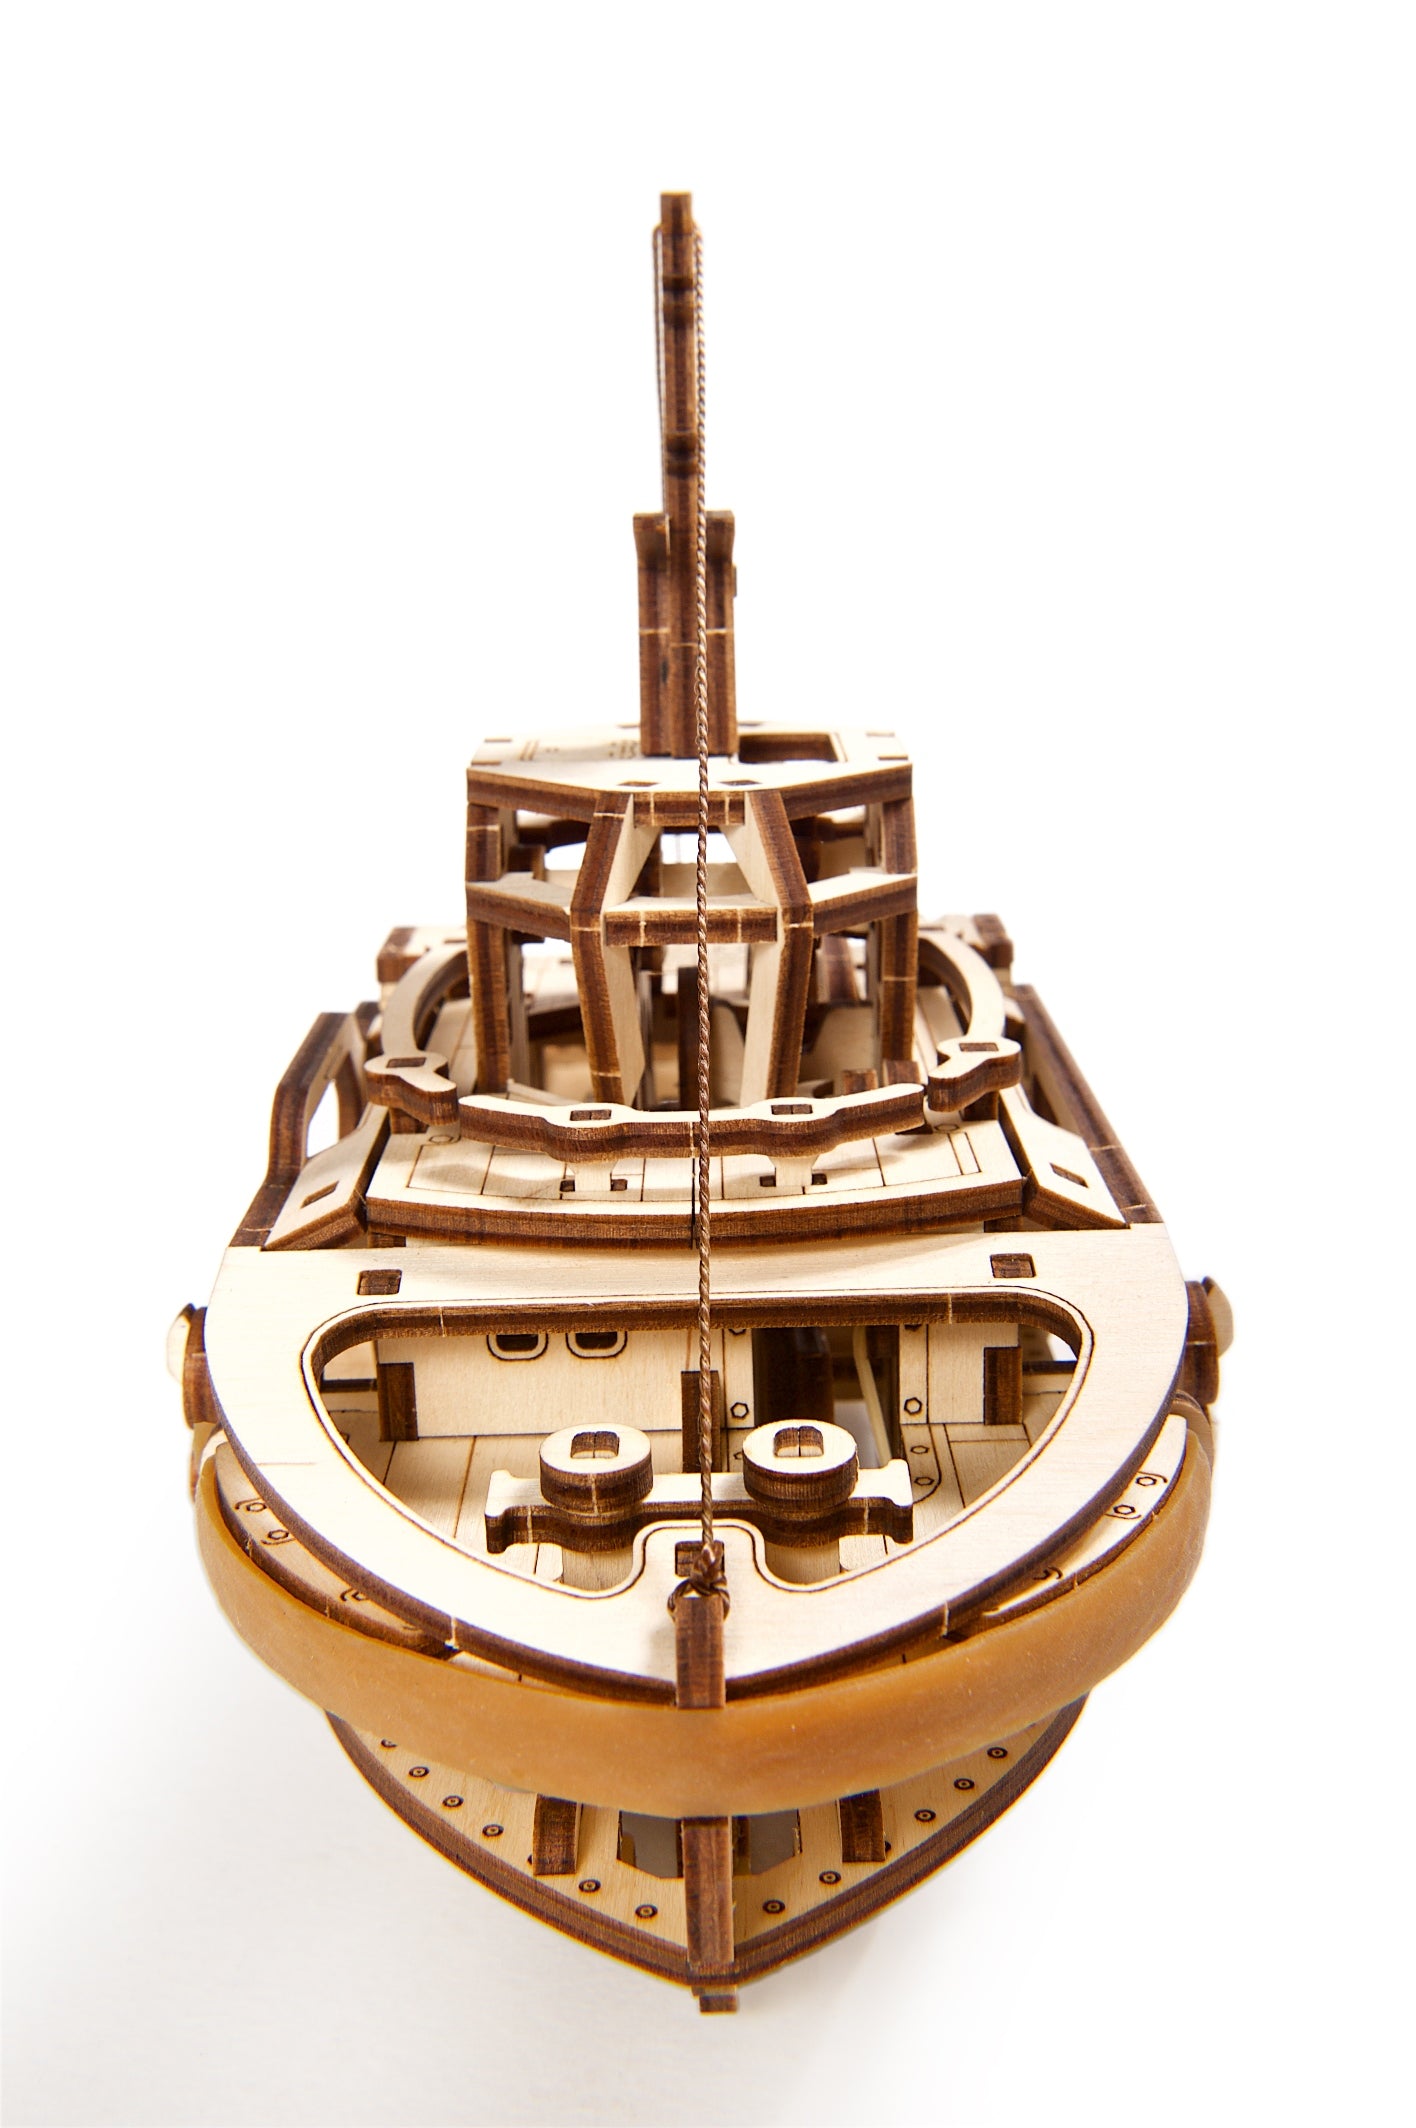 Tugboat Build Your Own Moving Model By Ugears Ugears Mechanical Models